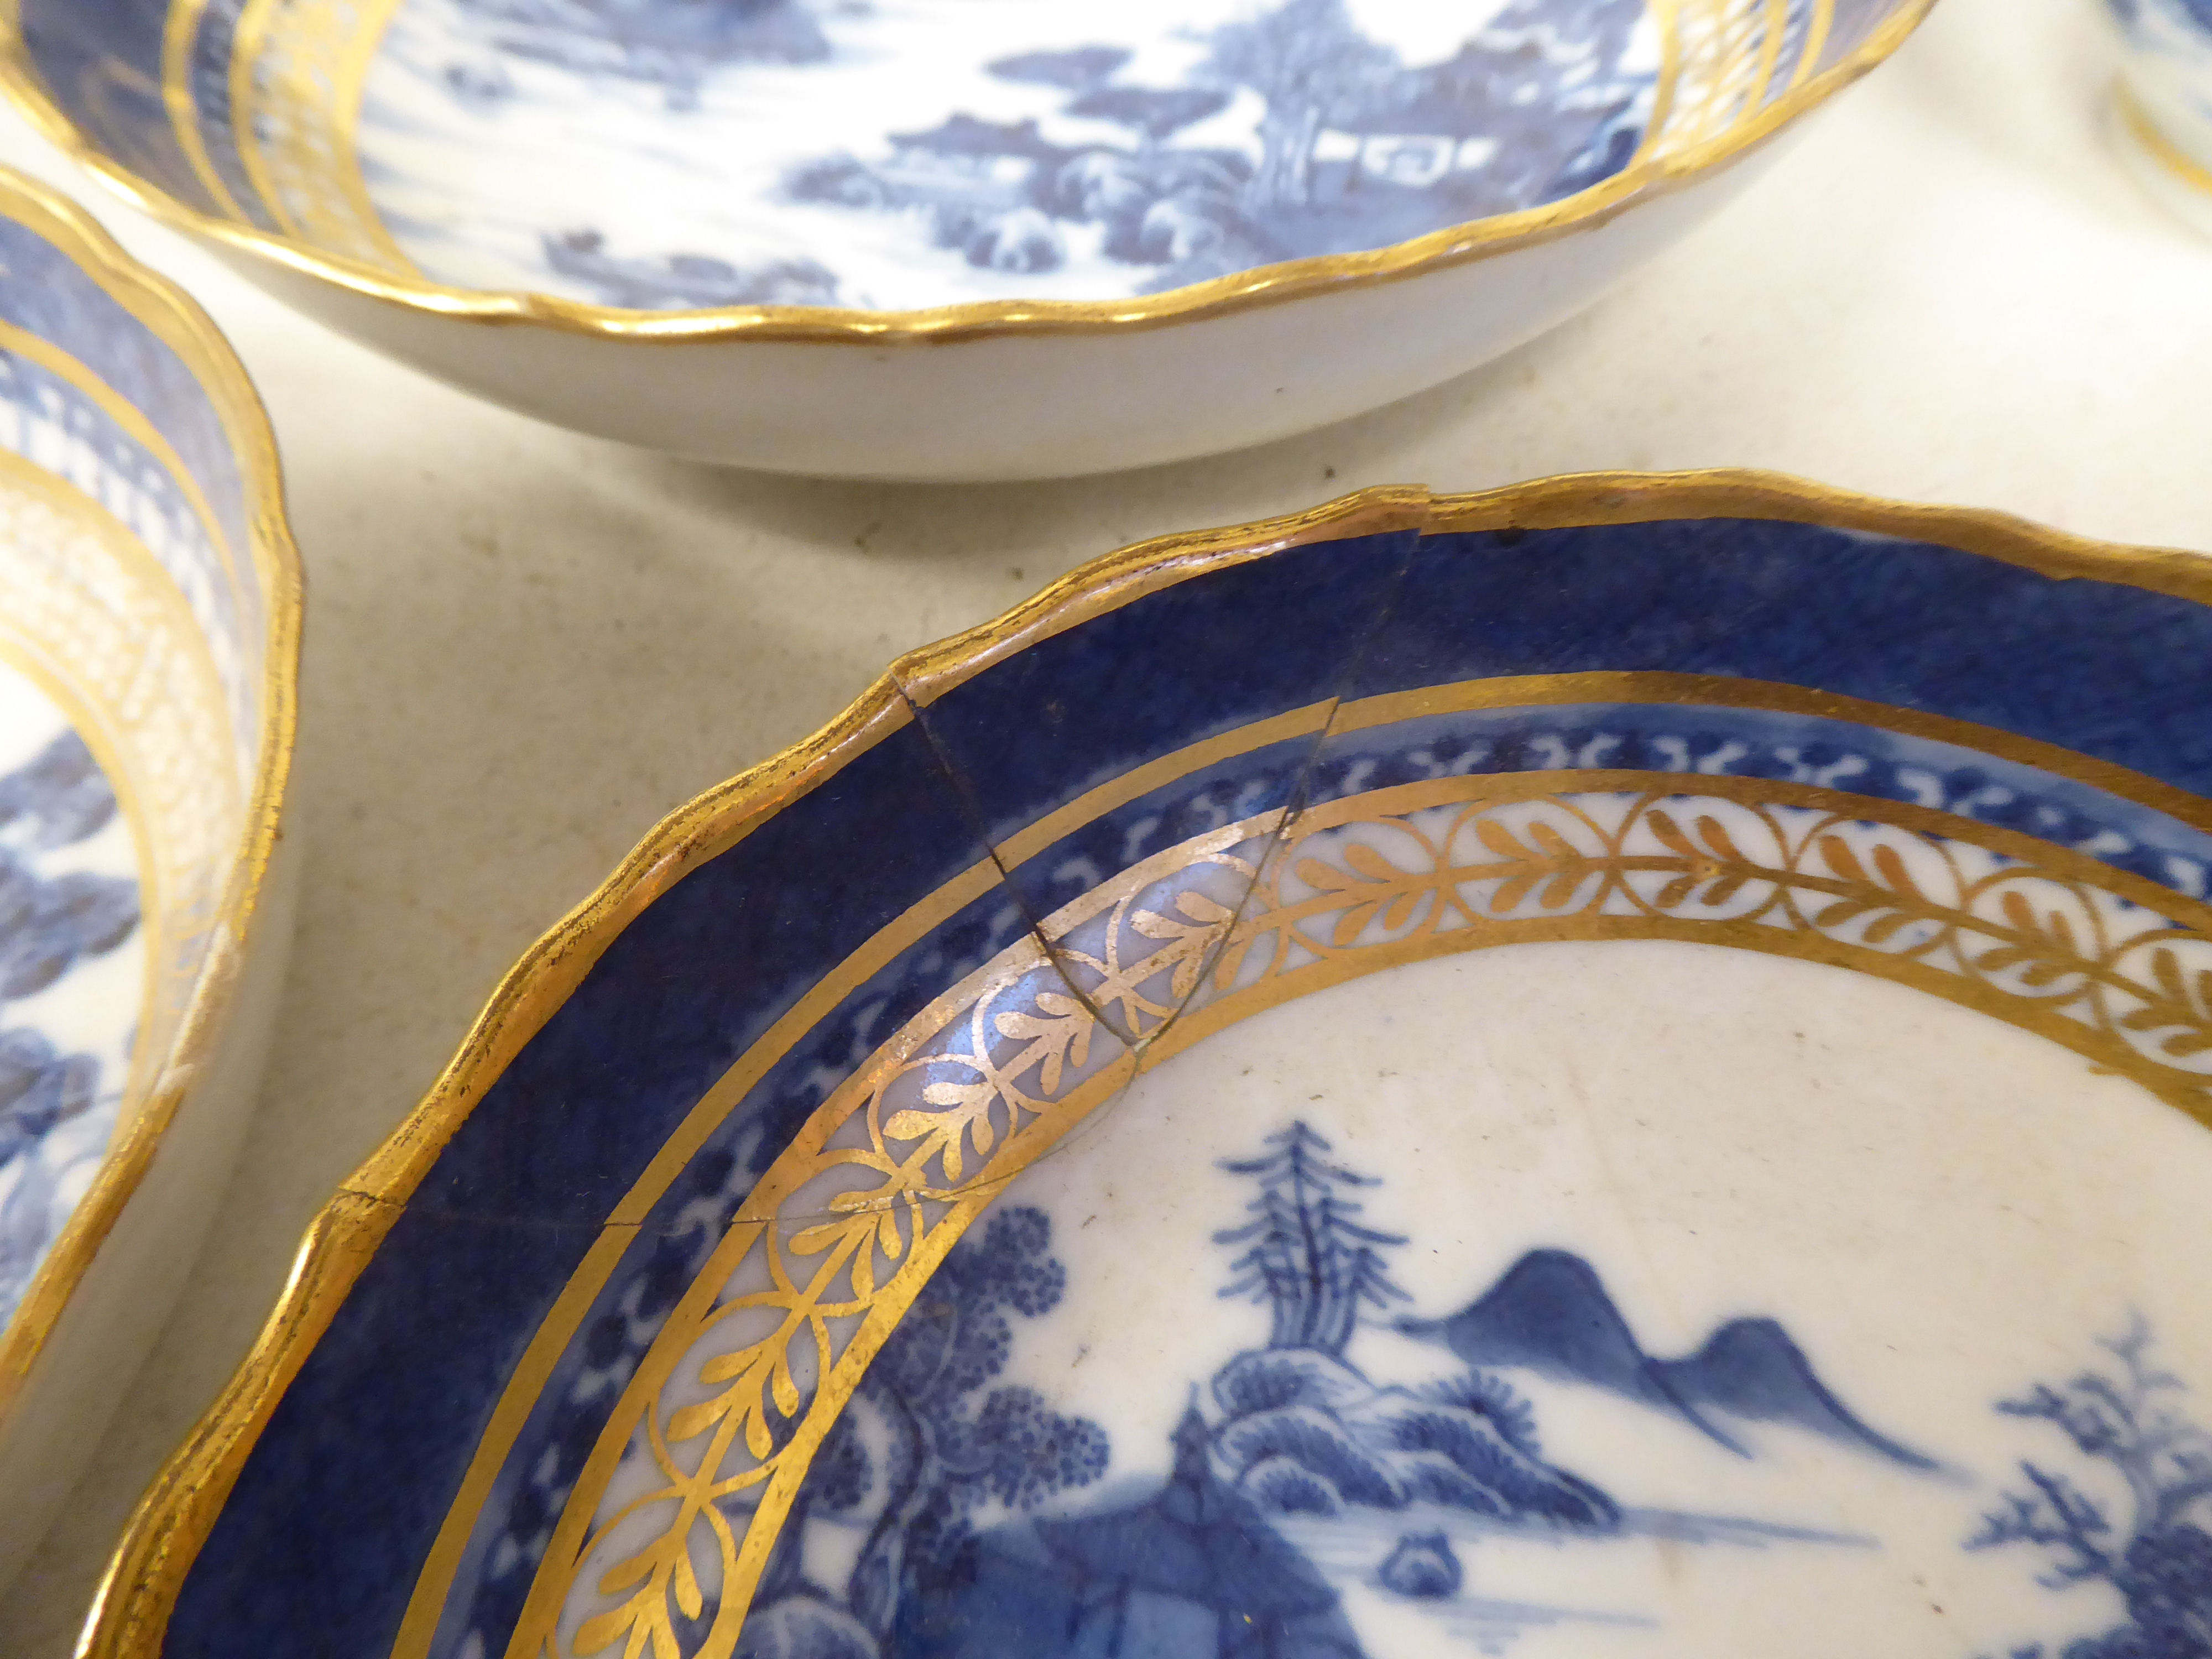 Late 18thC porcelain teaware, decorated in blue, white and gilding with Chinese seascapes, small - Image 3 of 4